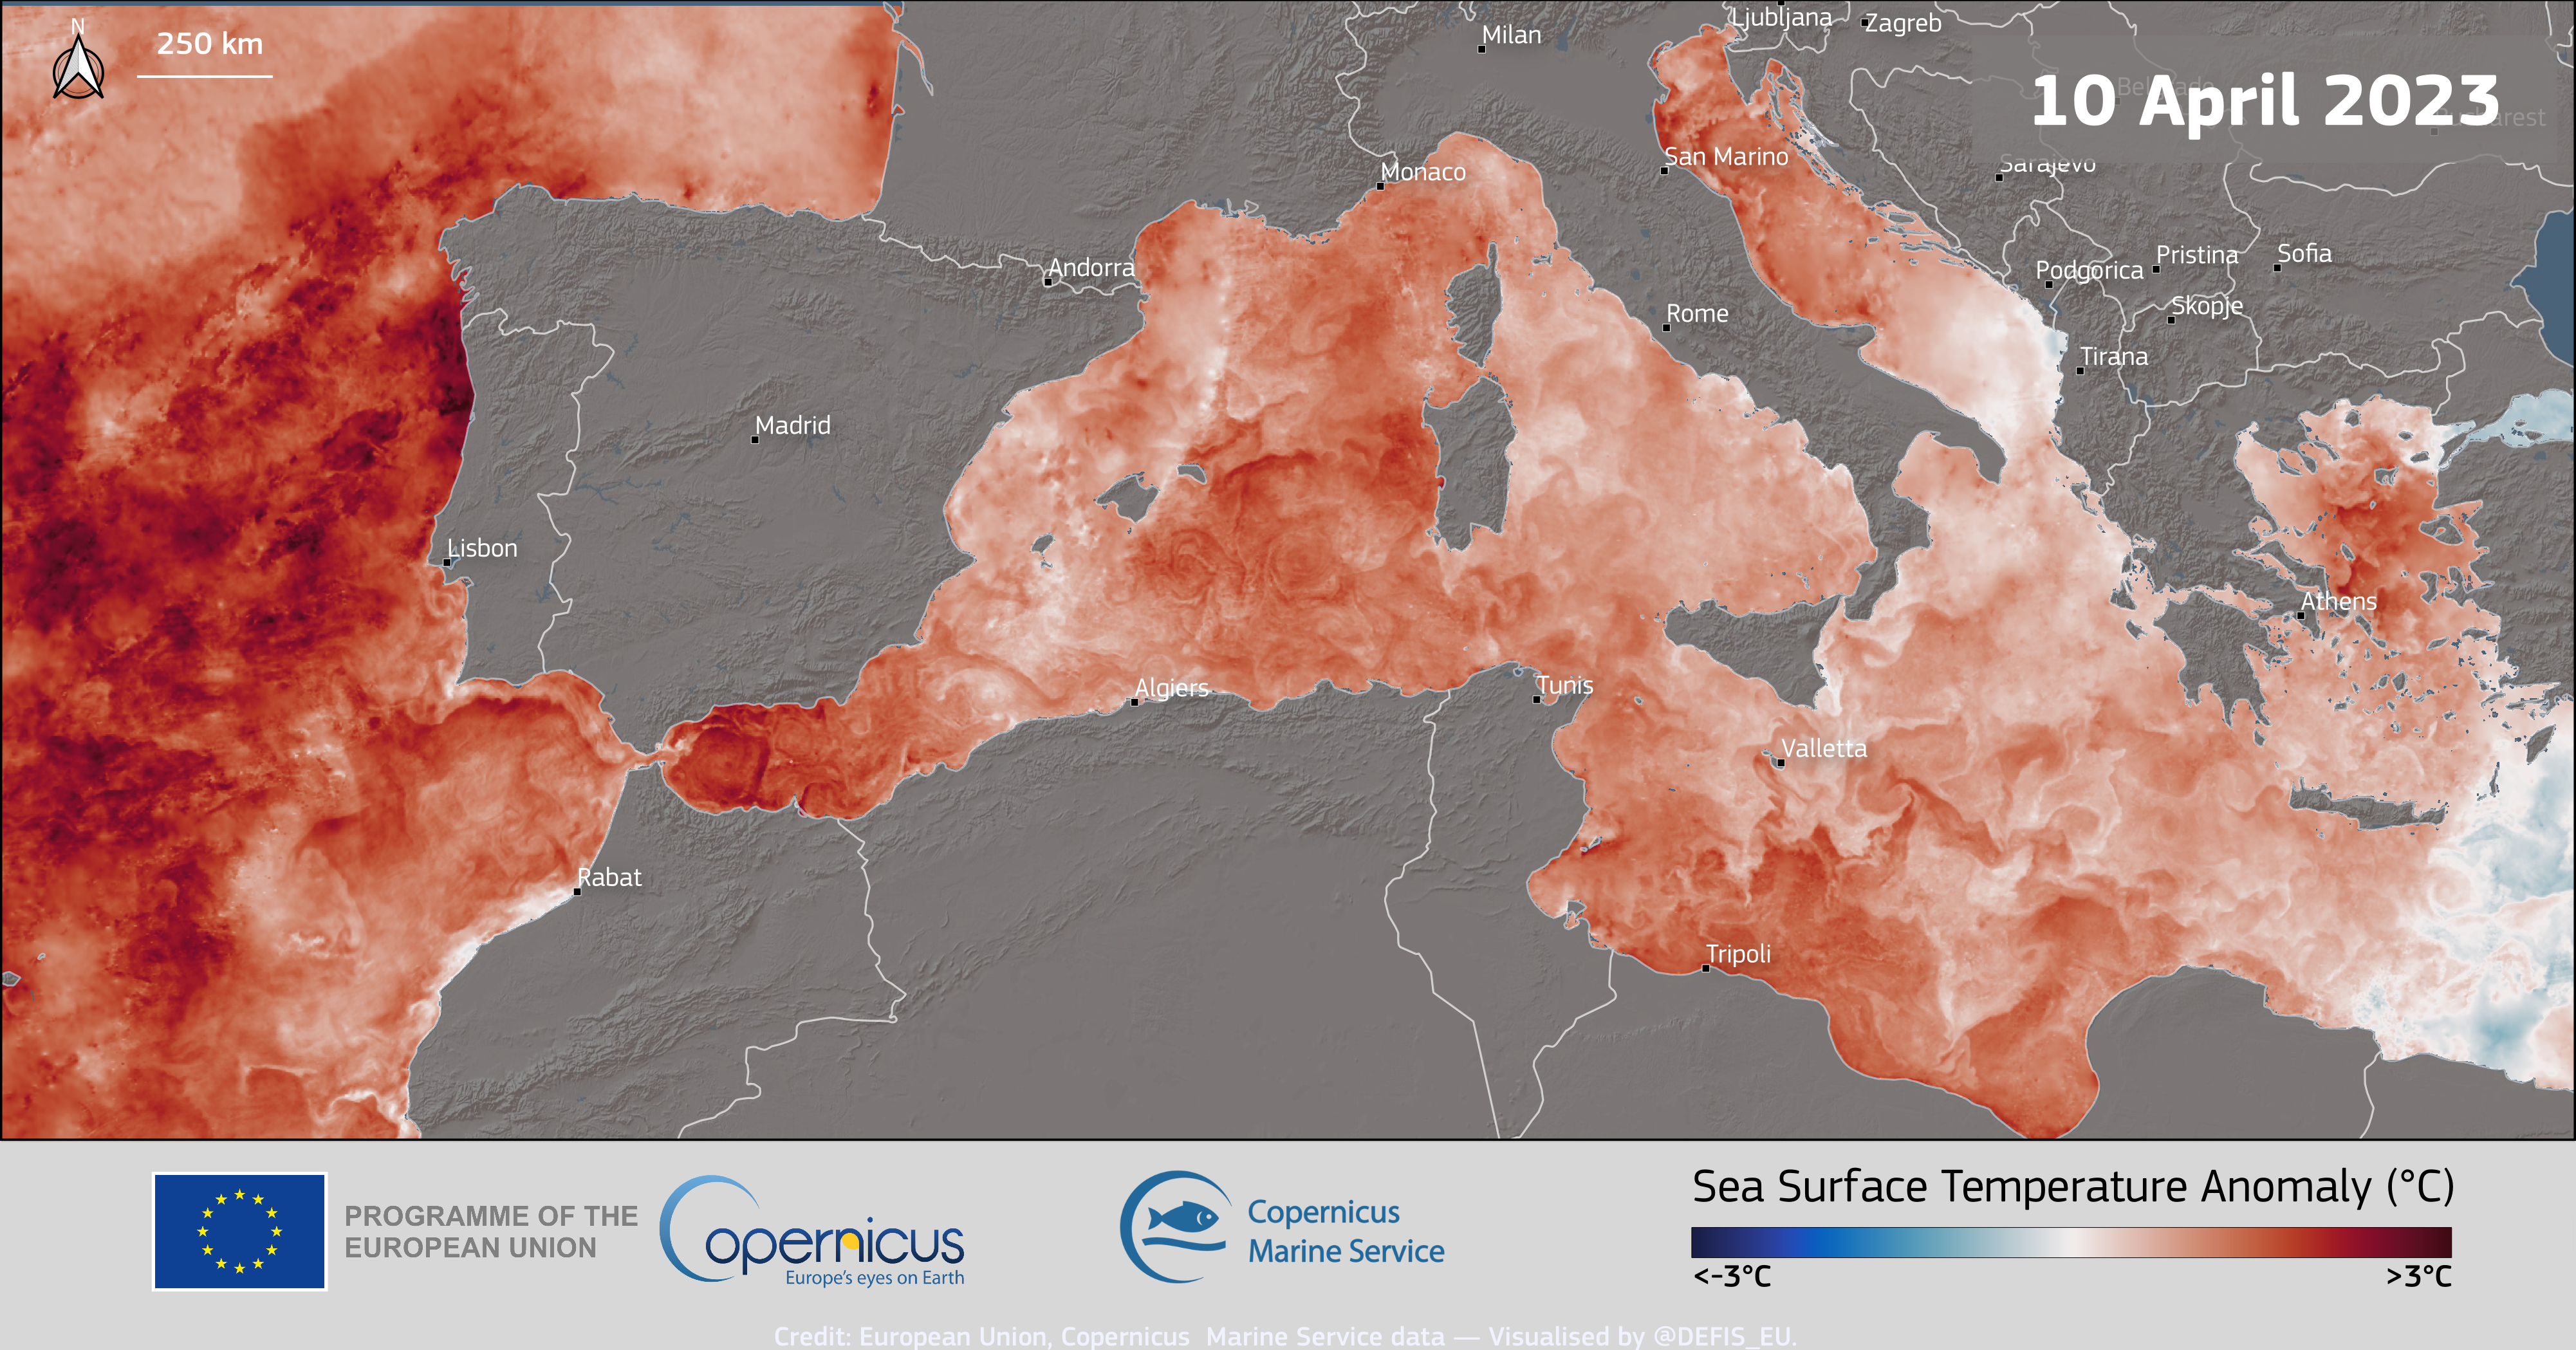 This image illustrates the Sea Surface Temperature (SST) anomaly in the Mediterranean and off the Atlantic coasts of the Iberian Peninsula and North Africa, using data from the Copernicus Marine Service